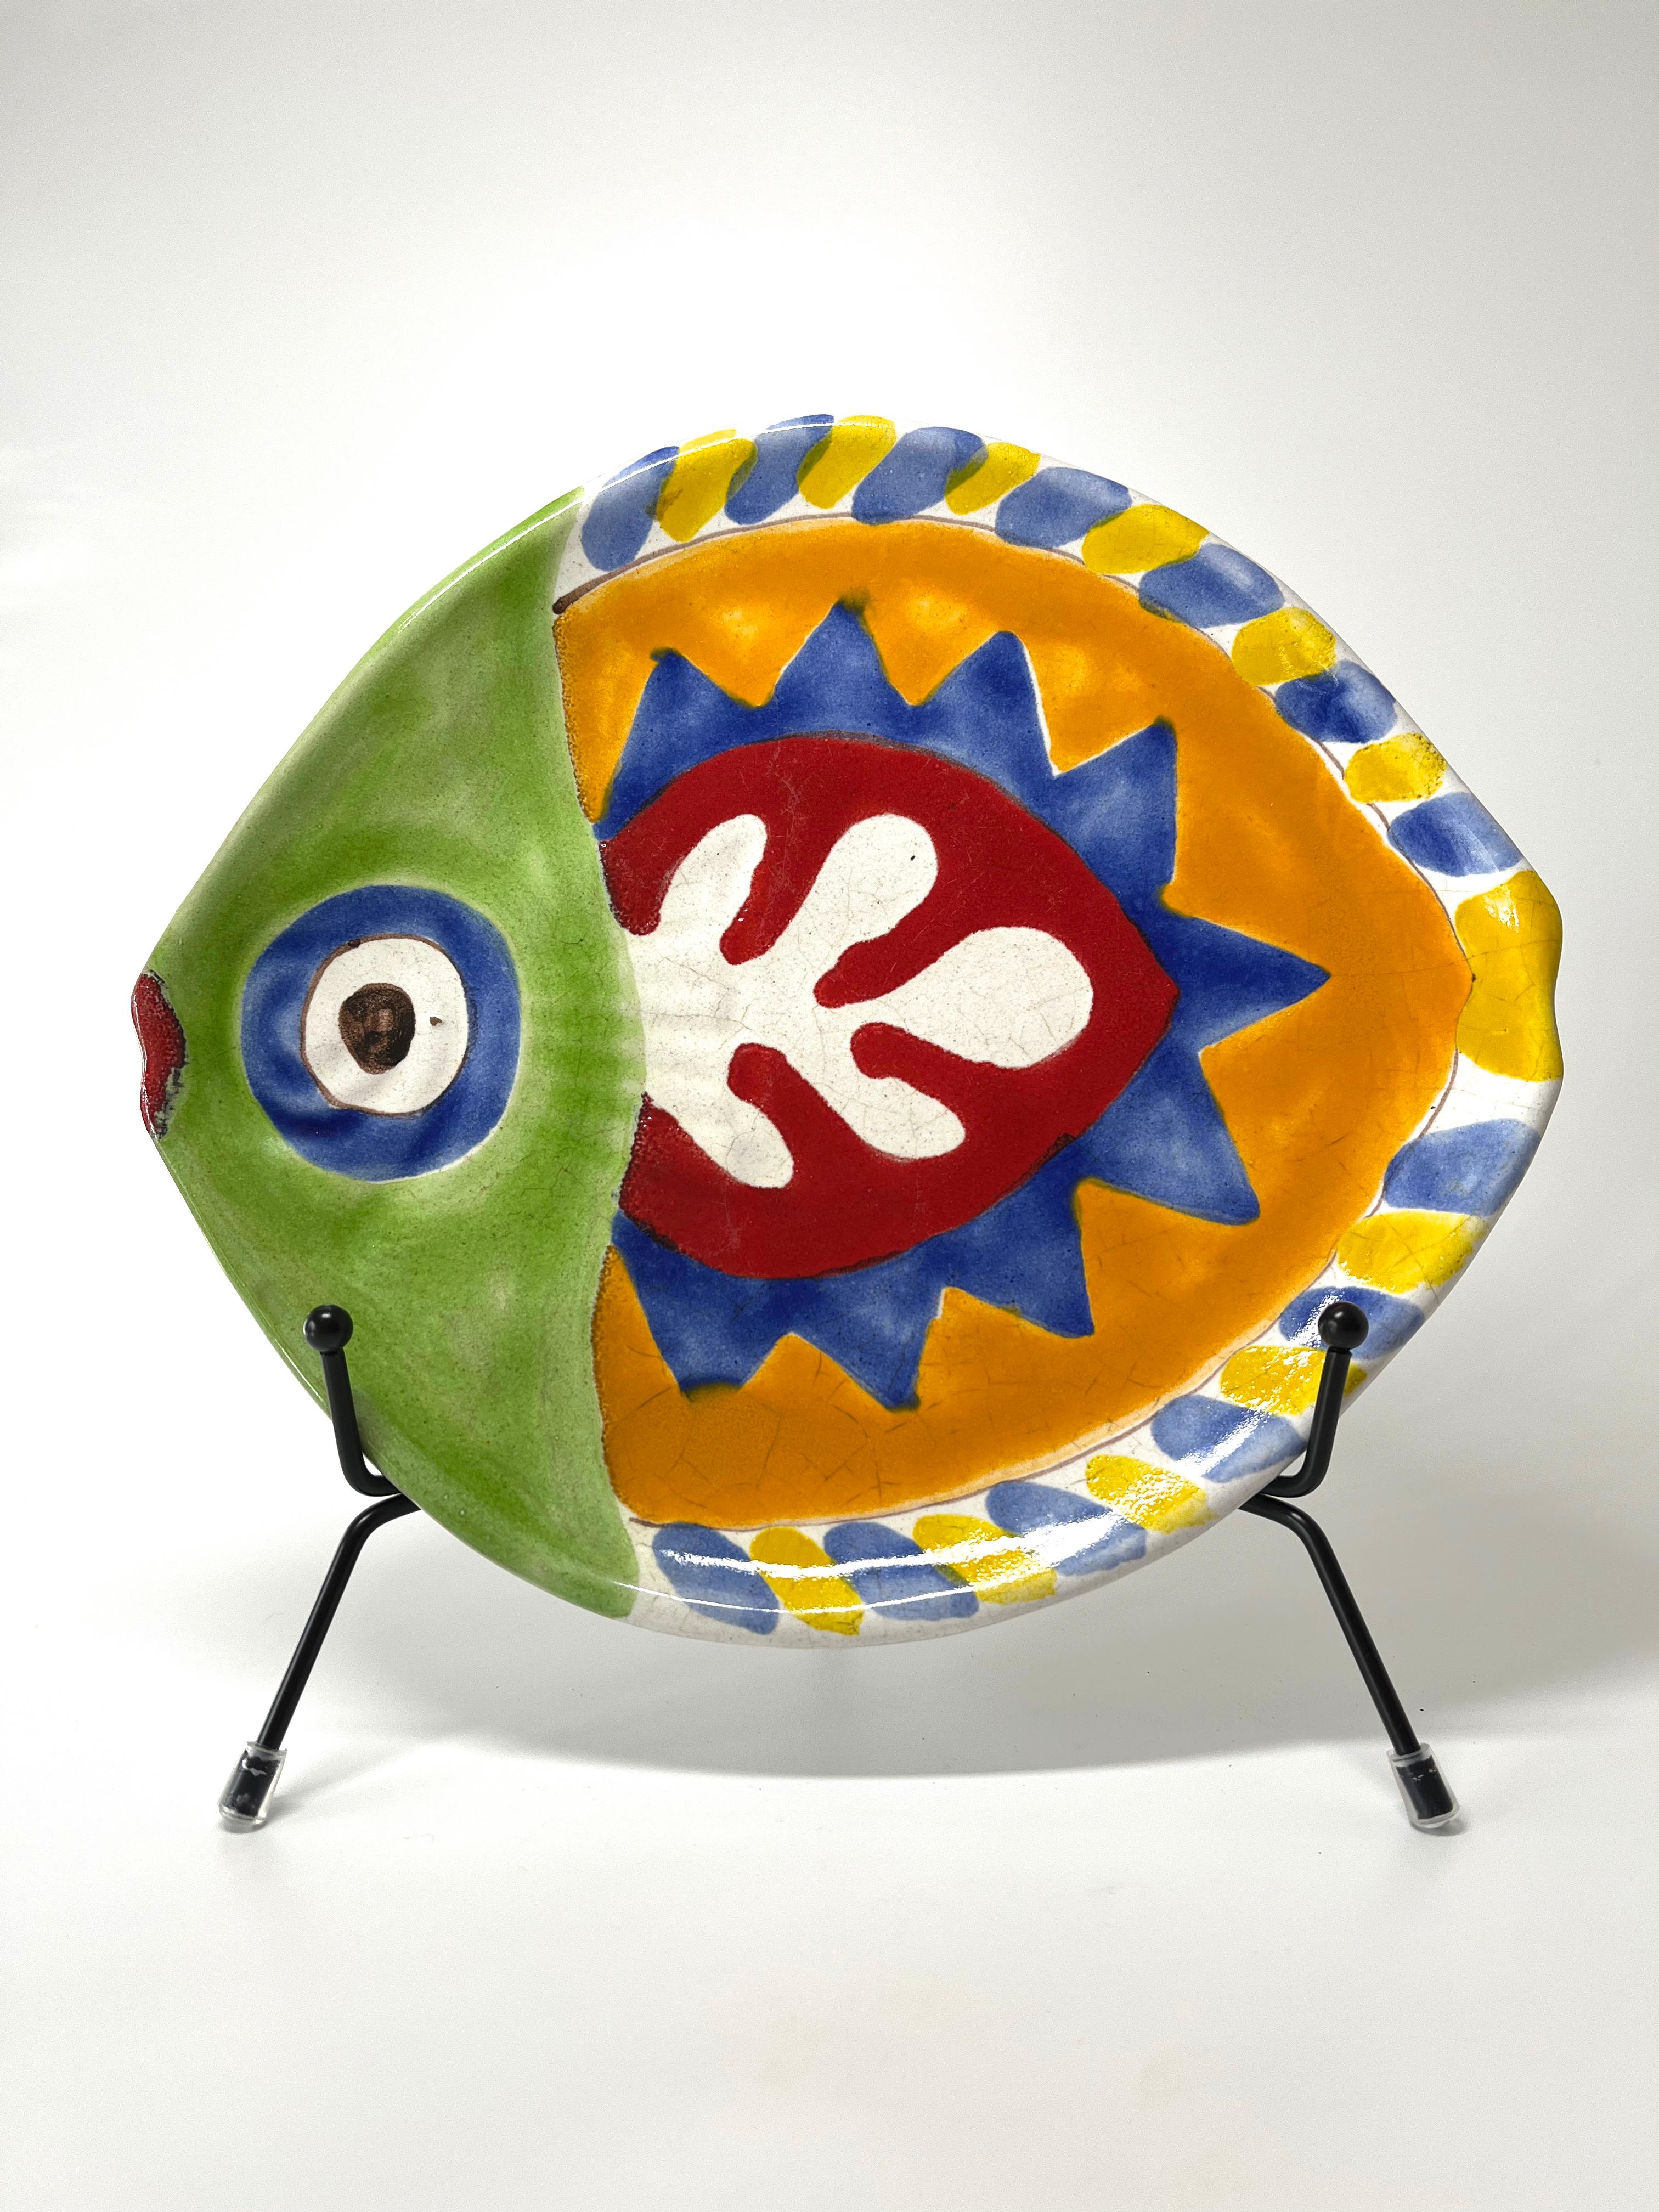 Incredibly vibrant colours adorn this hand decorated fish platter by DeSimone, Italy
Enthusiastically hand painted, a signature of DeSimone style
Circa 1960's
Signed DeSimone, Italy
Height 1 inch, Width 9 inch, Depth 8 inch
In very good condition.